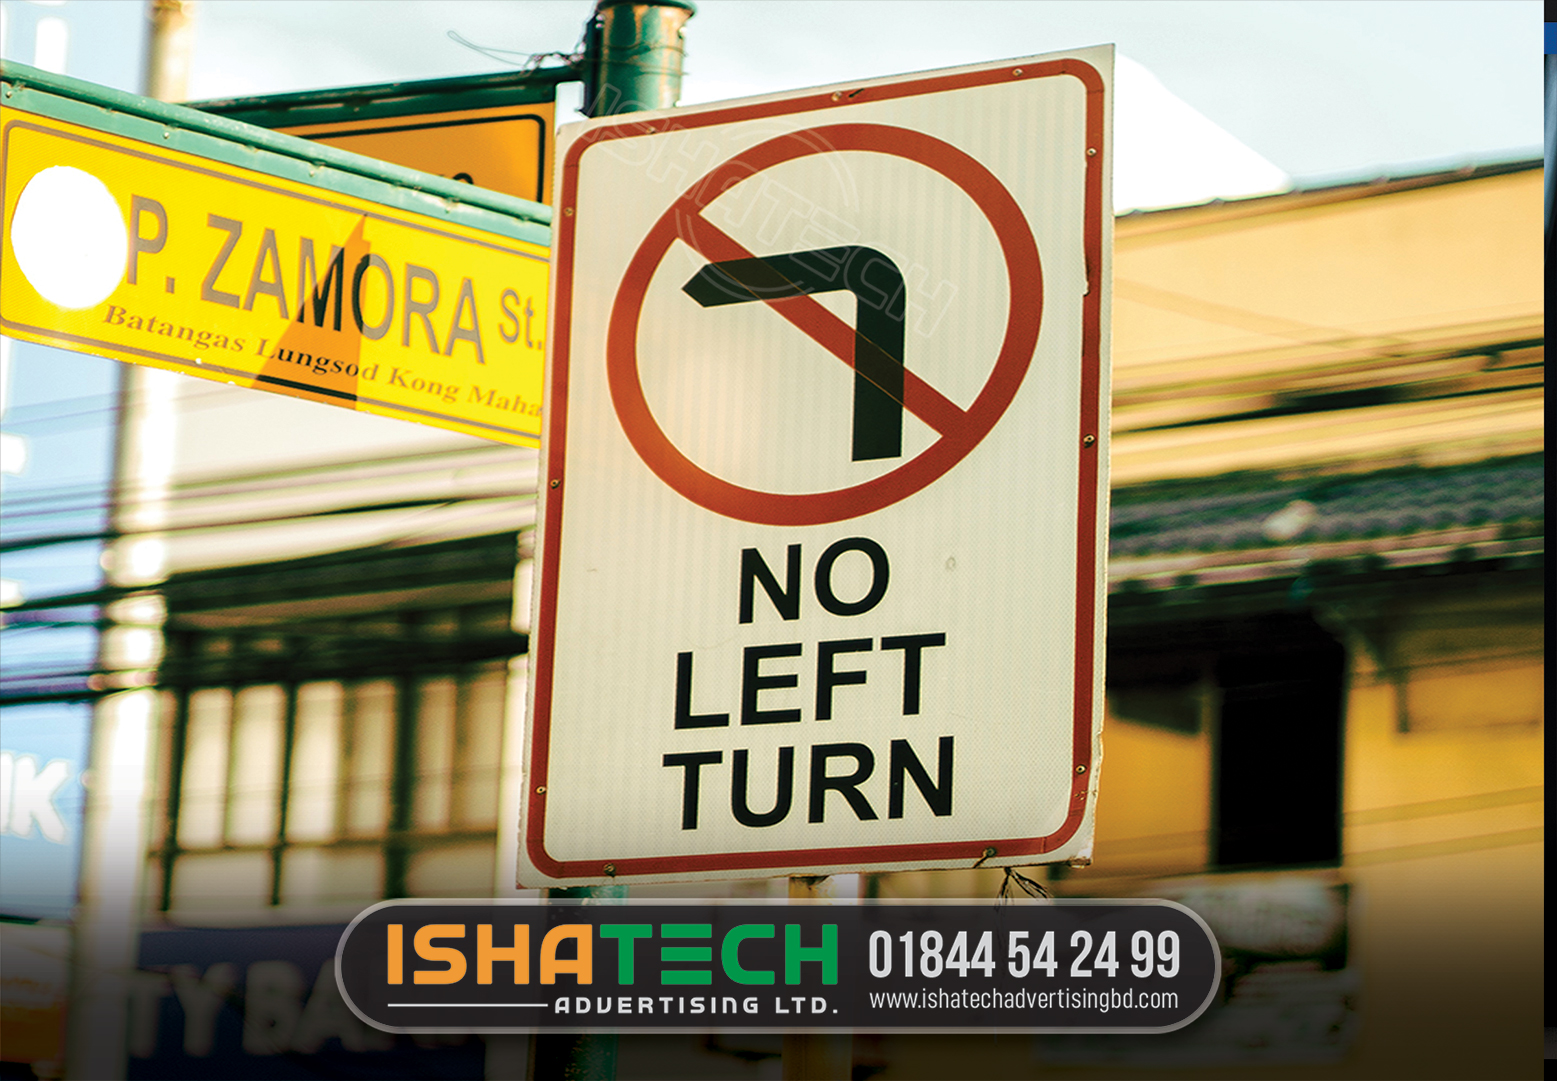 NO LEDT TURN DIRECTIONAL SIGNS, Road directional signboard bd price Road directional signboard bd installation Road directional signboard bd app Best road directional signboard bd, how many traffic signs in bangladesh